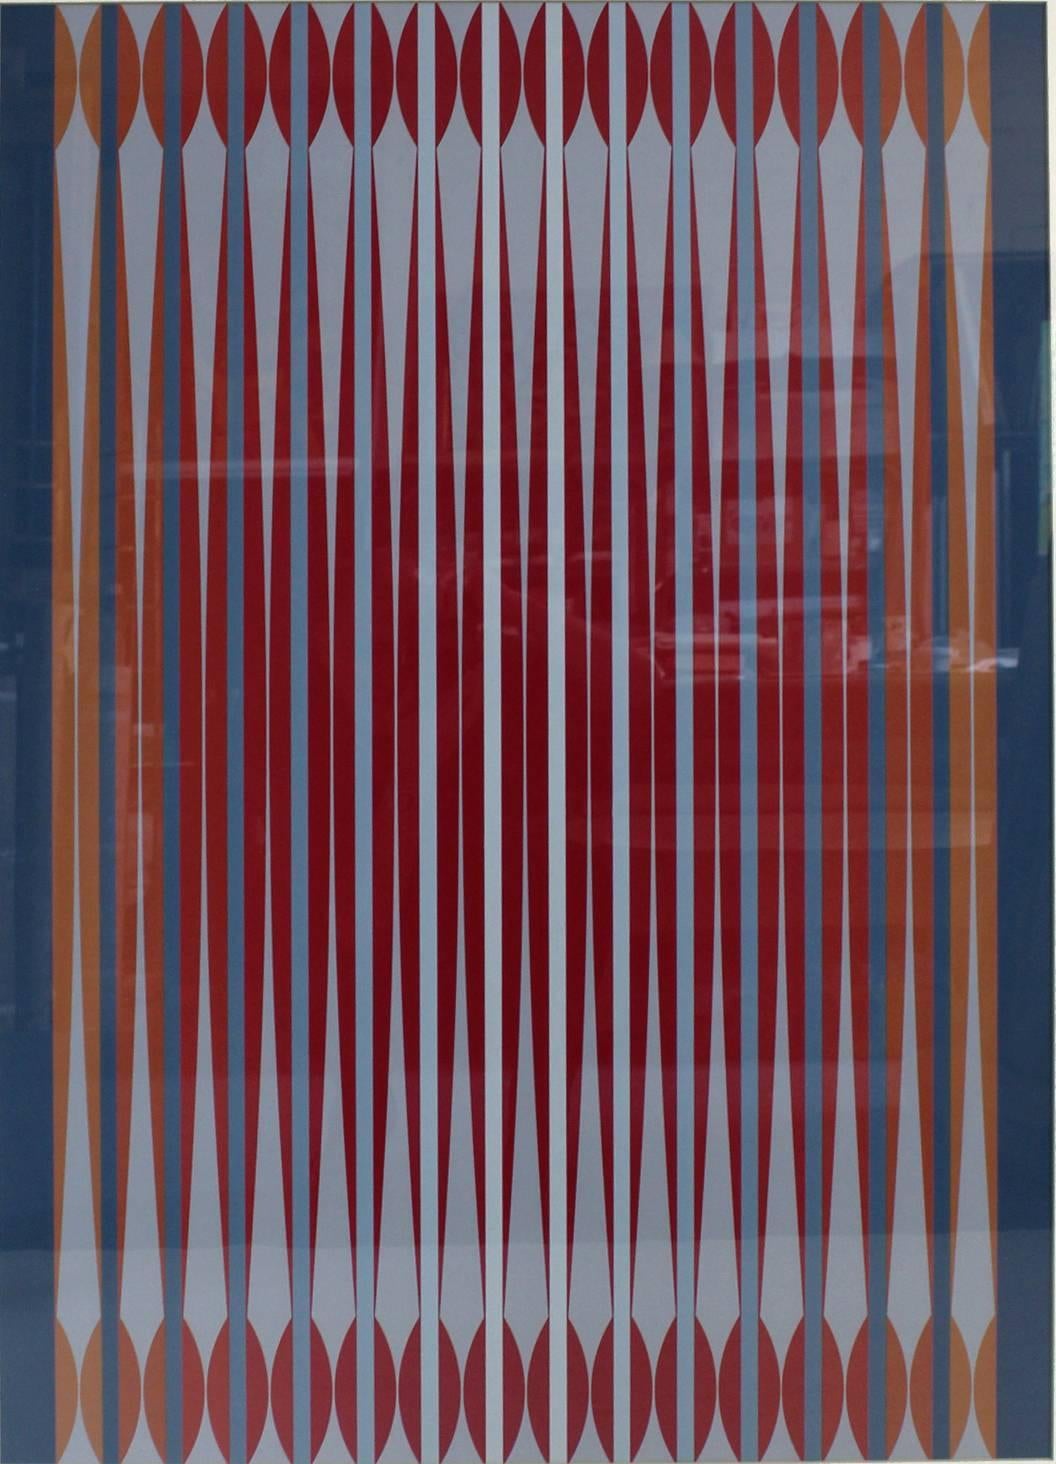 Framed Op Art painting by famous Yugoslavian pop and optical artist Dordevic Miodrag (B. 1936). Oil on Paper. Signed on bottom right and on verso.

Dimensions:
With Frame: 47.5" H X 36" W.
Painting: 36.5" H X 26" W.